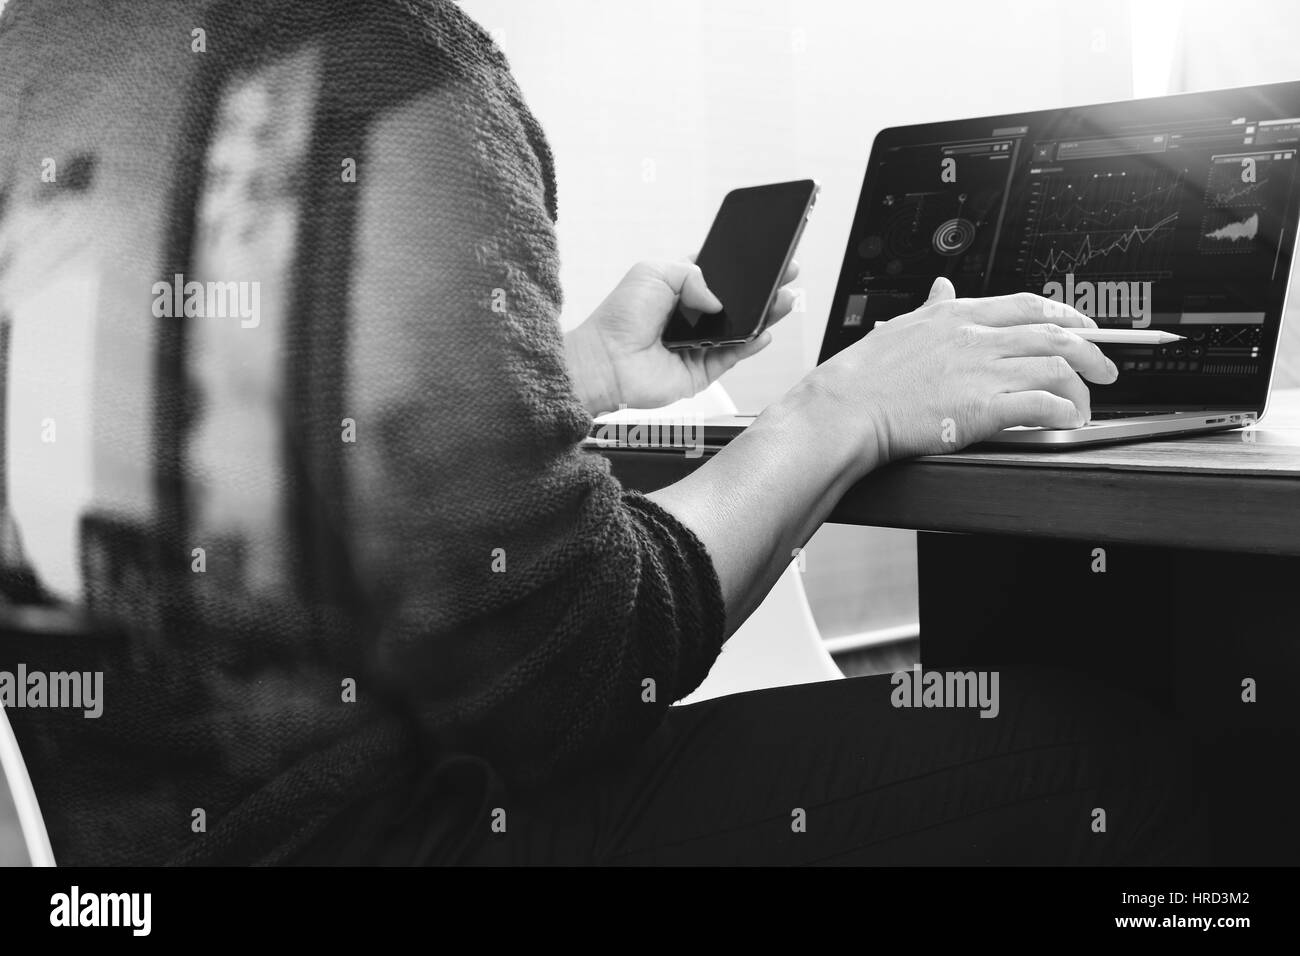 Designer hand using mobile payments online shopping,omni channel,laptop computer on wooden desk,black white Stock Photo